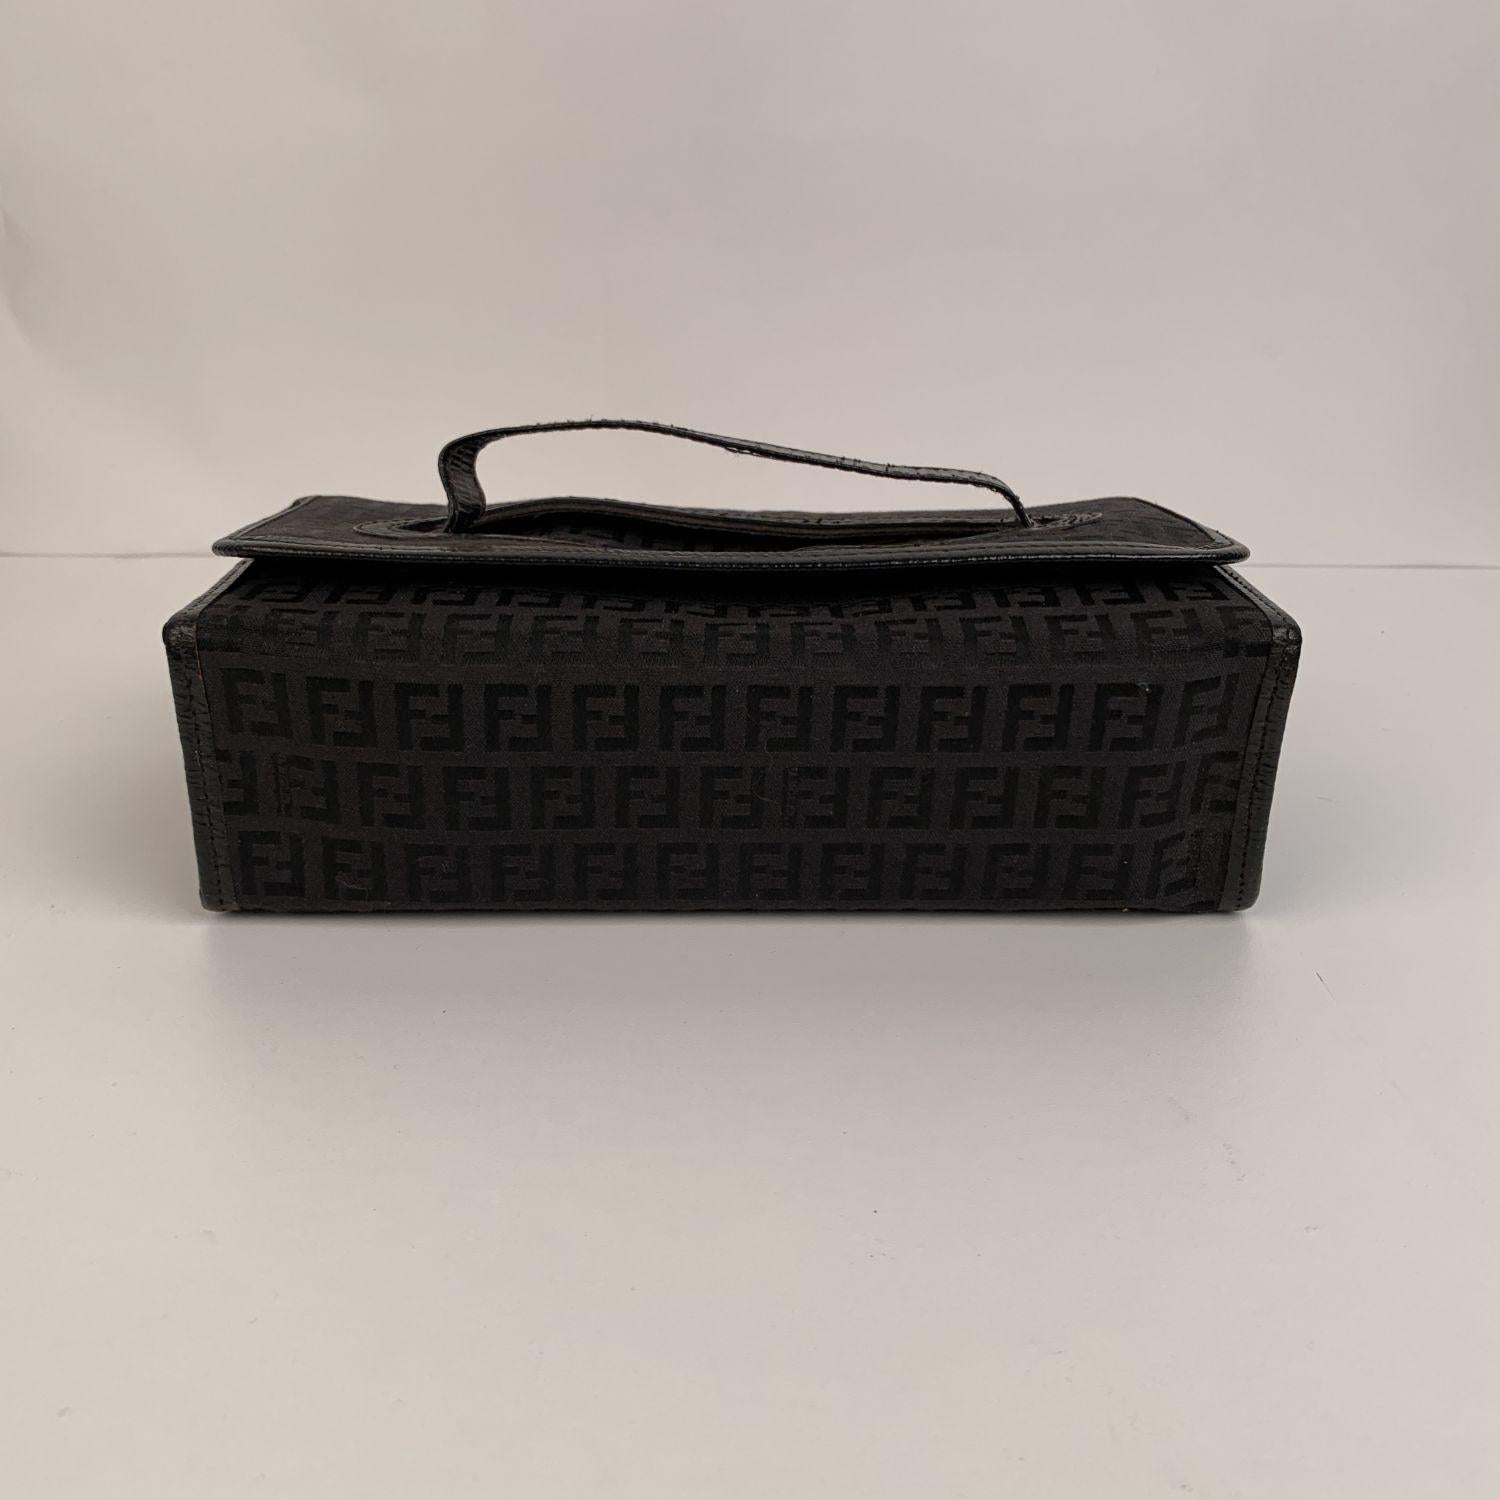 Beautiful vintage Fendi cosmetic case, crafted in black FF monograms canvas with genuine leather trim. Top carry handle and upper hook and loop closure. It can be used also as a travel jewelry case. 'Fendi s.a.s Roma - made in Italy' embossed